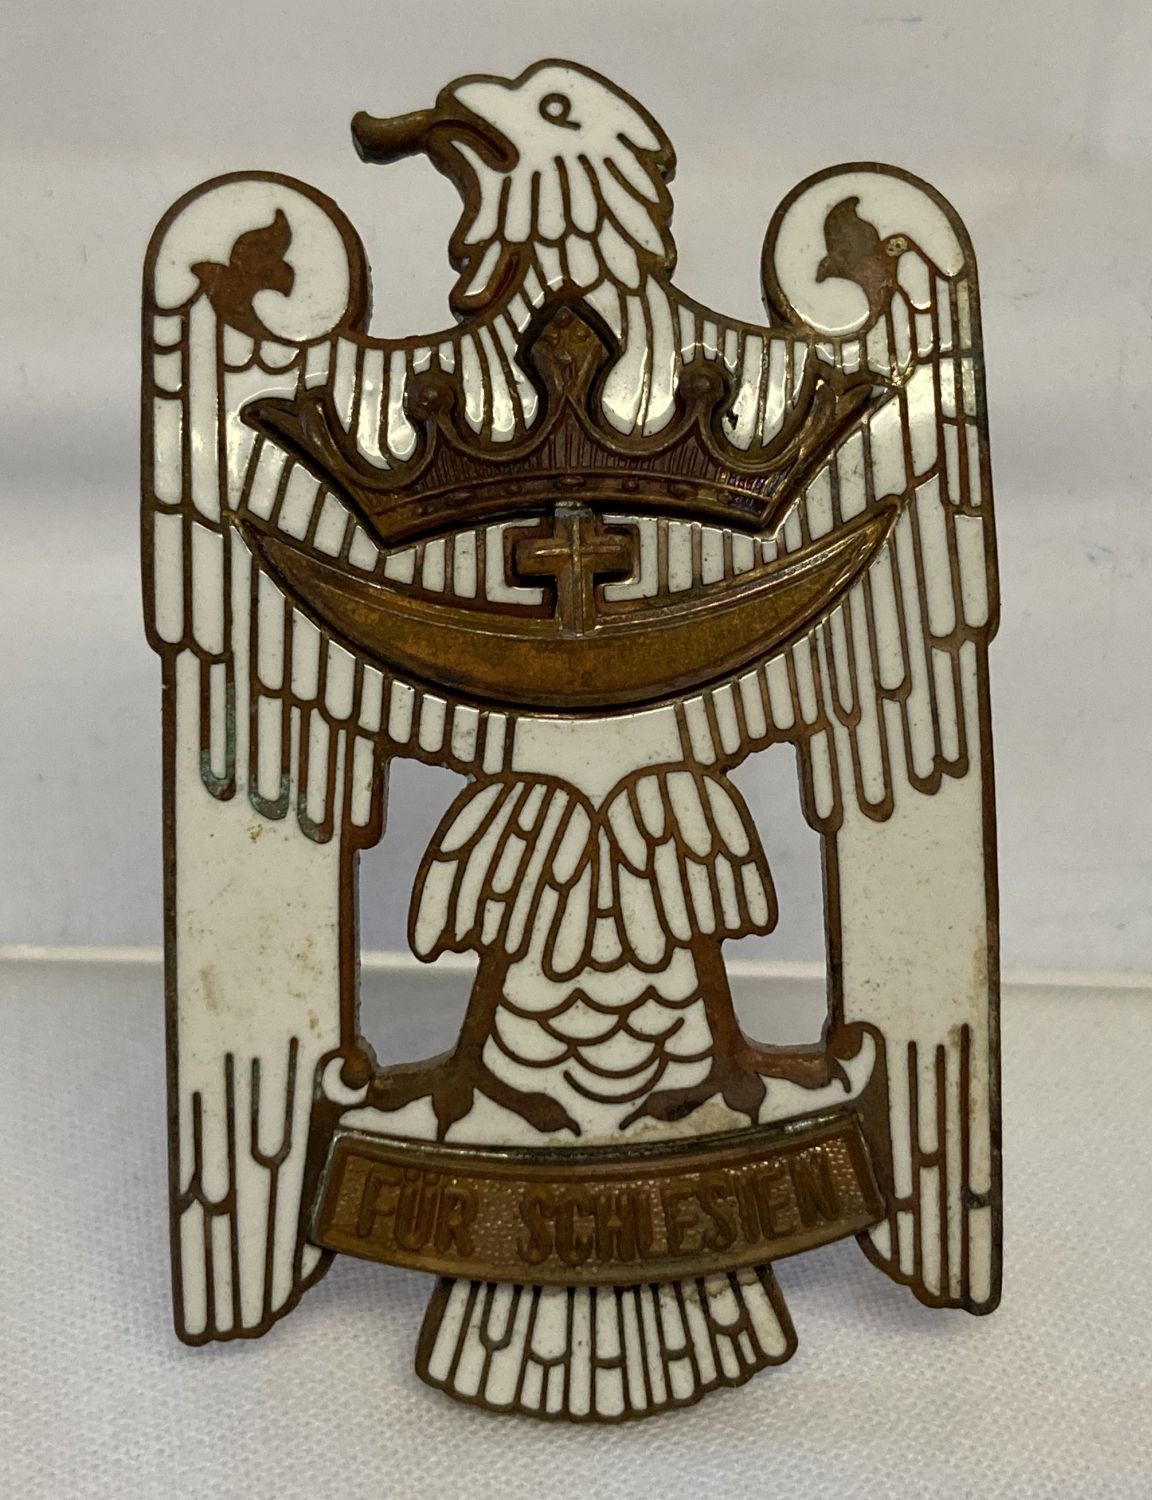 A German badge in the style of the Interwar period Silesian Eagle 1st class.